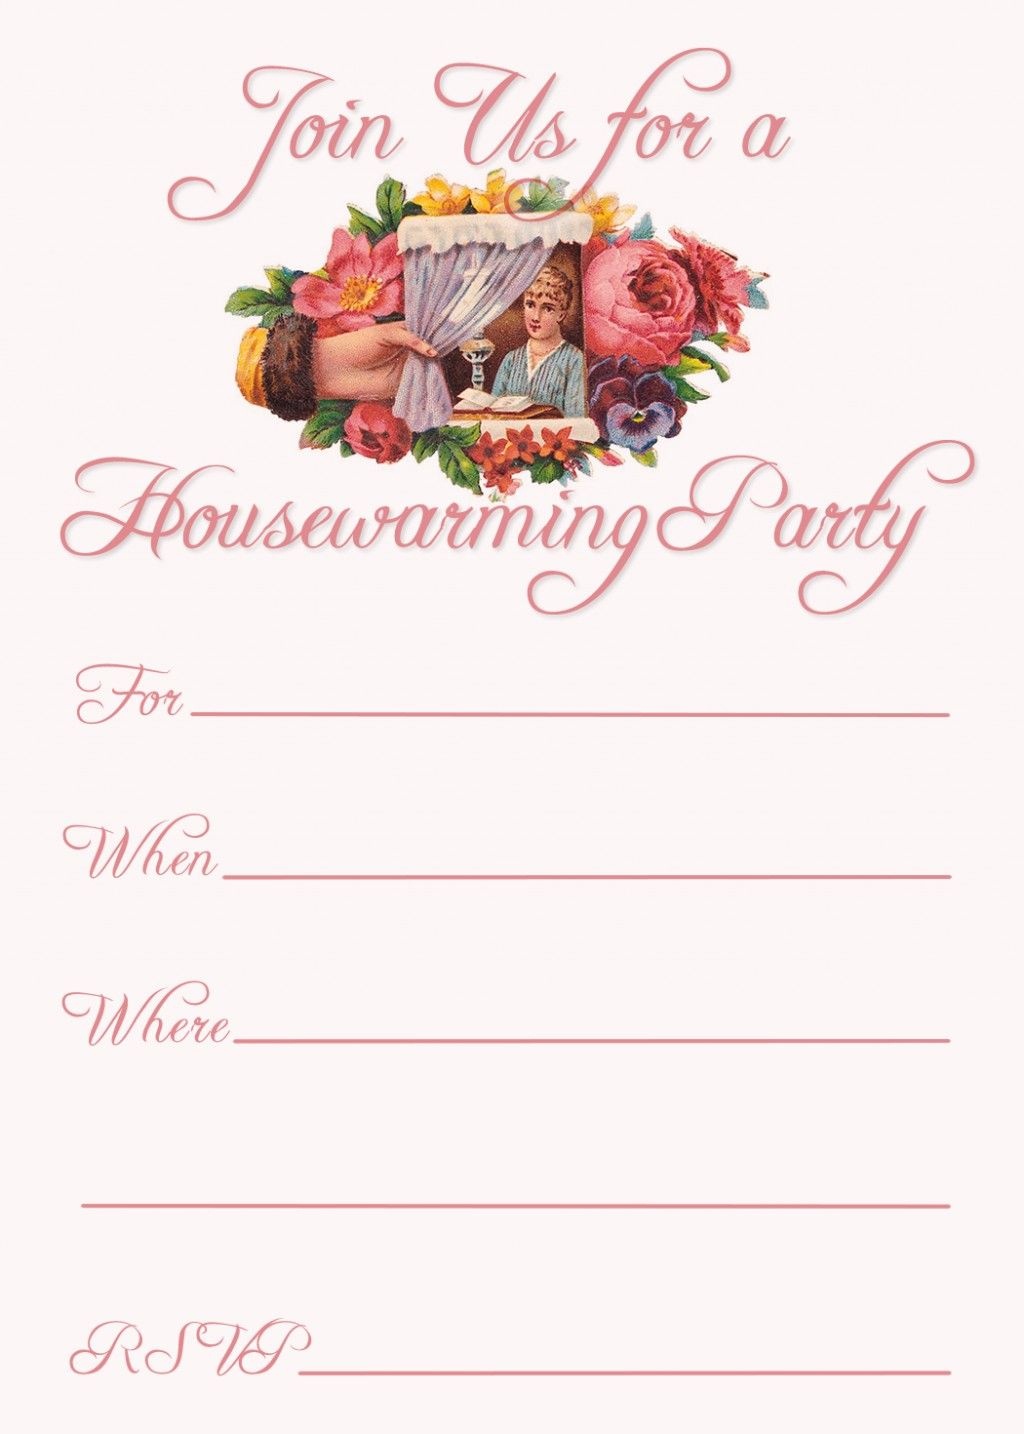 Free Printable Housewarming Party Invitations | Housewarming - Free Printable Housewarming Invitations Cards